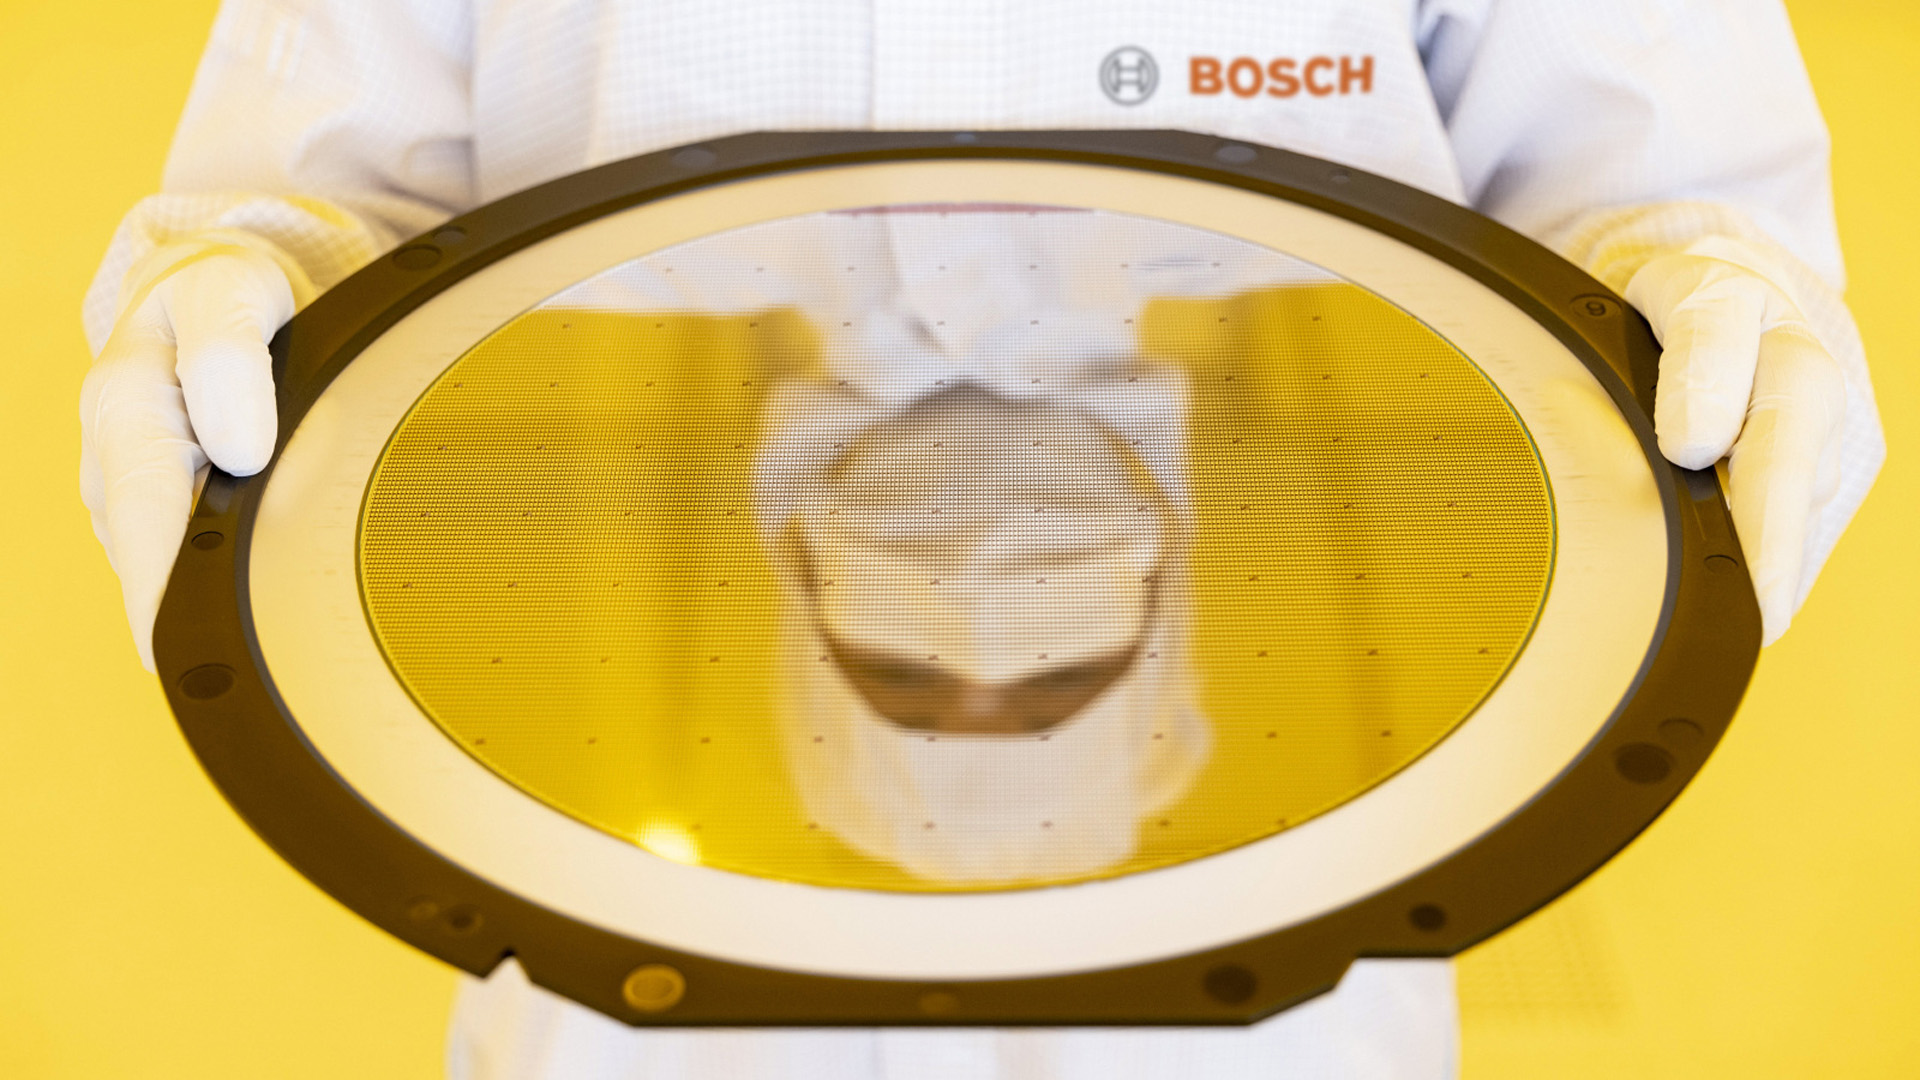 Rising demand for SiC chips: Bosch plans to acquire U.S. chipmaker TSI Semiconductors